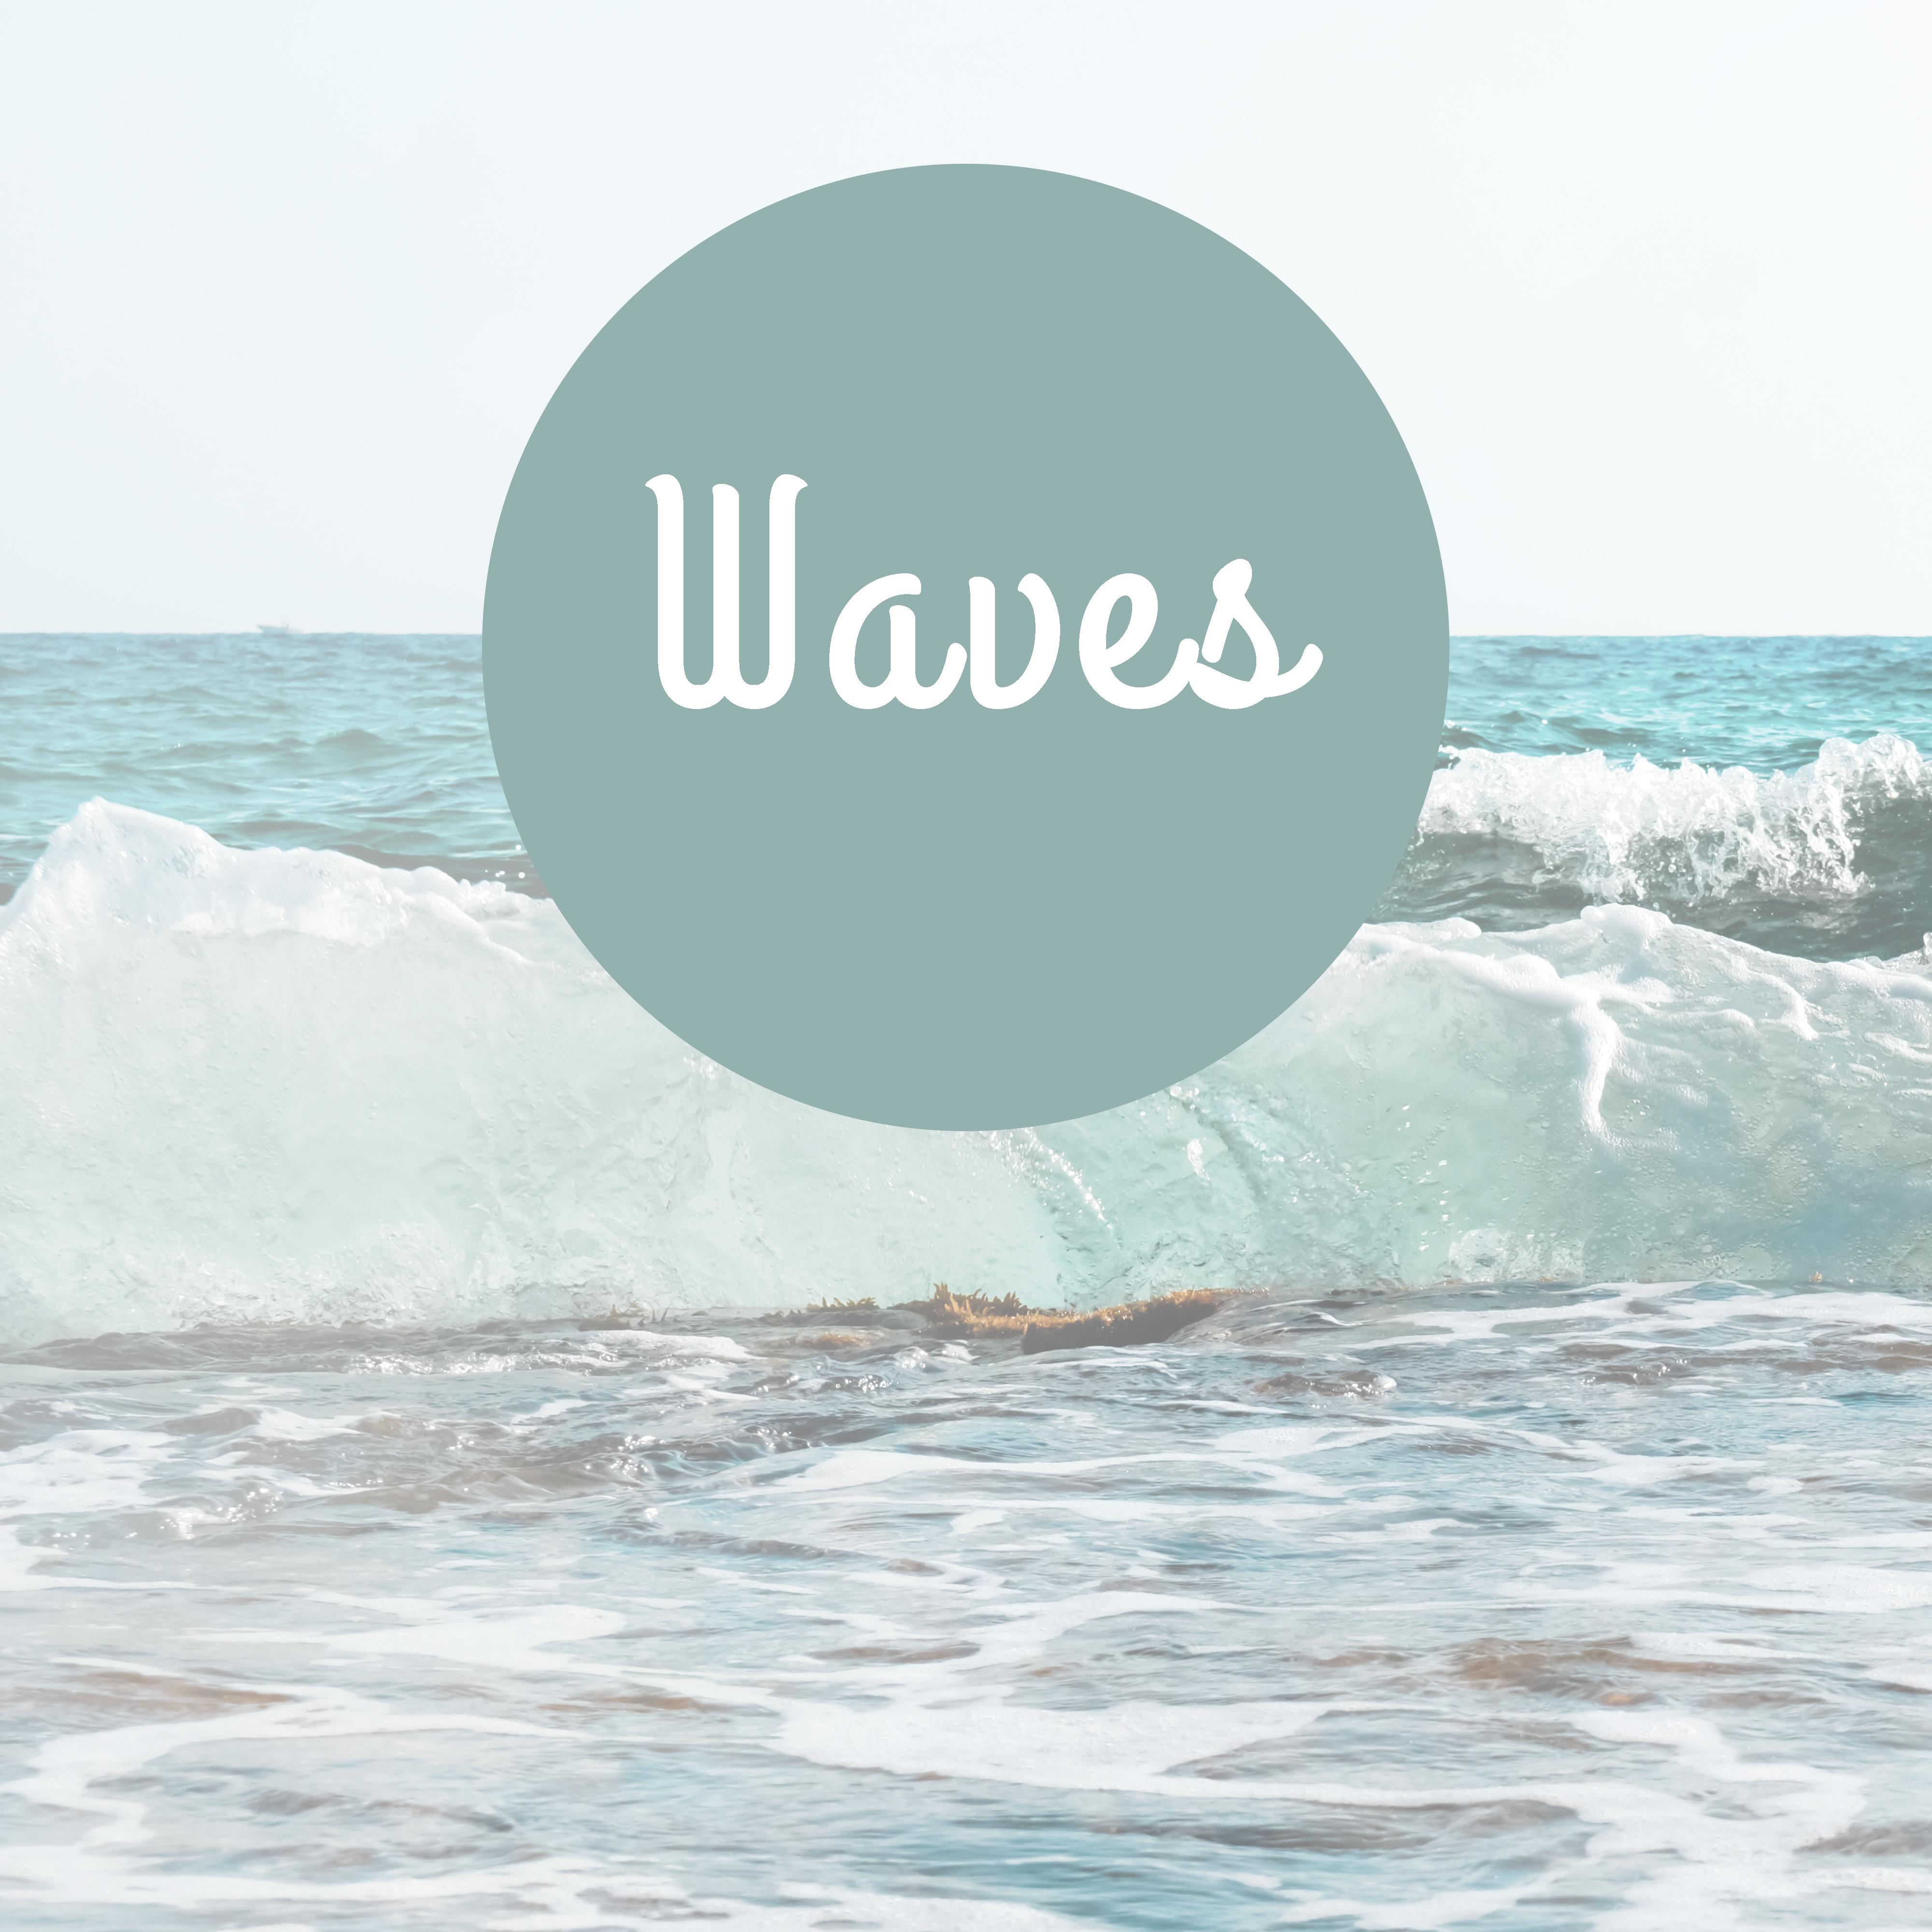 Waves – Relaxing Melodies for Sleep, Relaxation, Relief for Mind, Calm Sea, Ocean Dreams